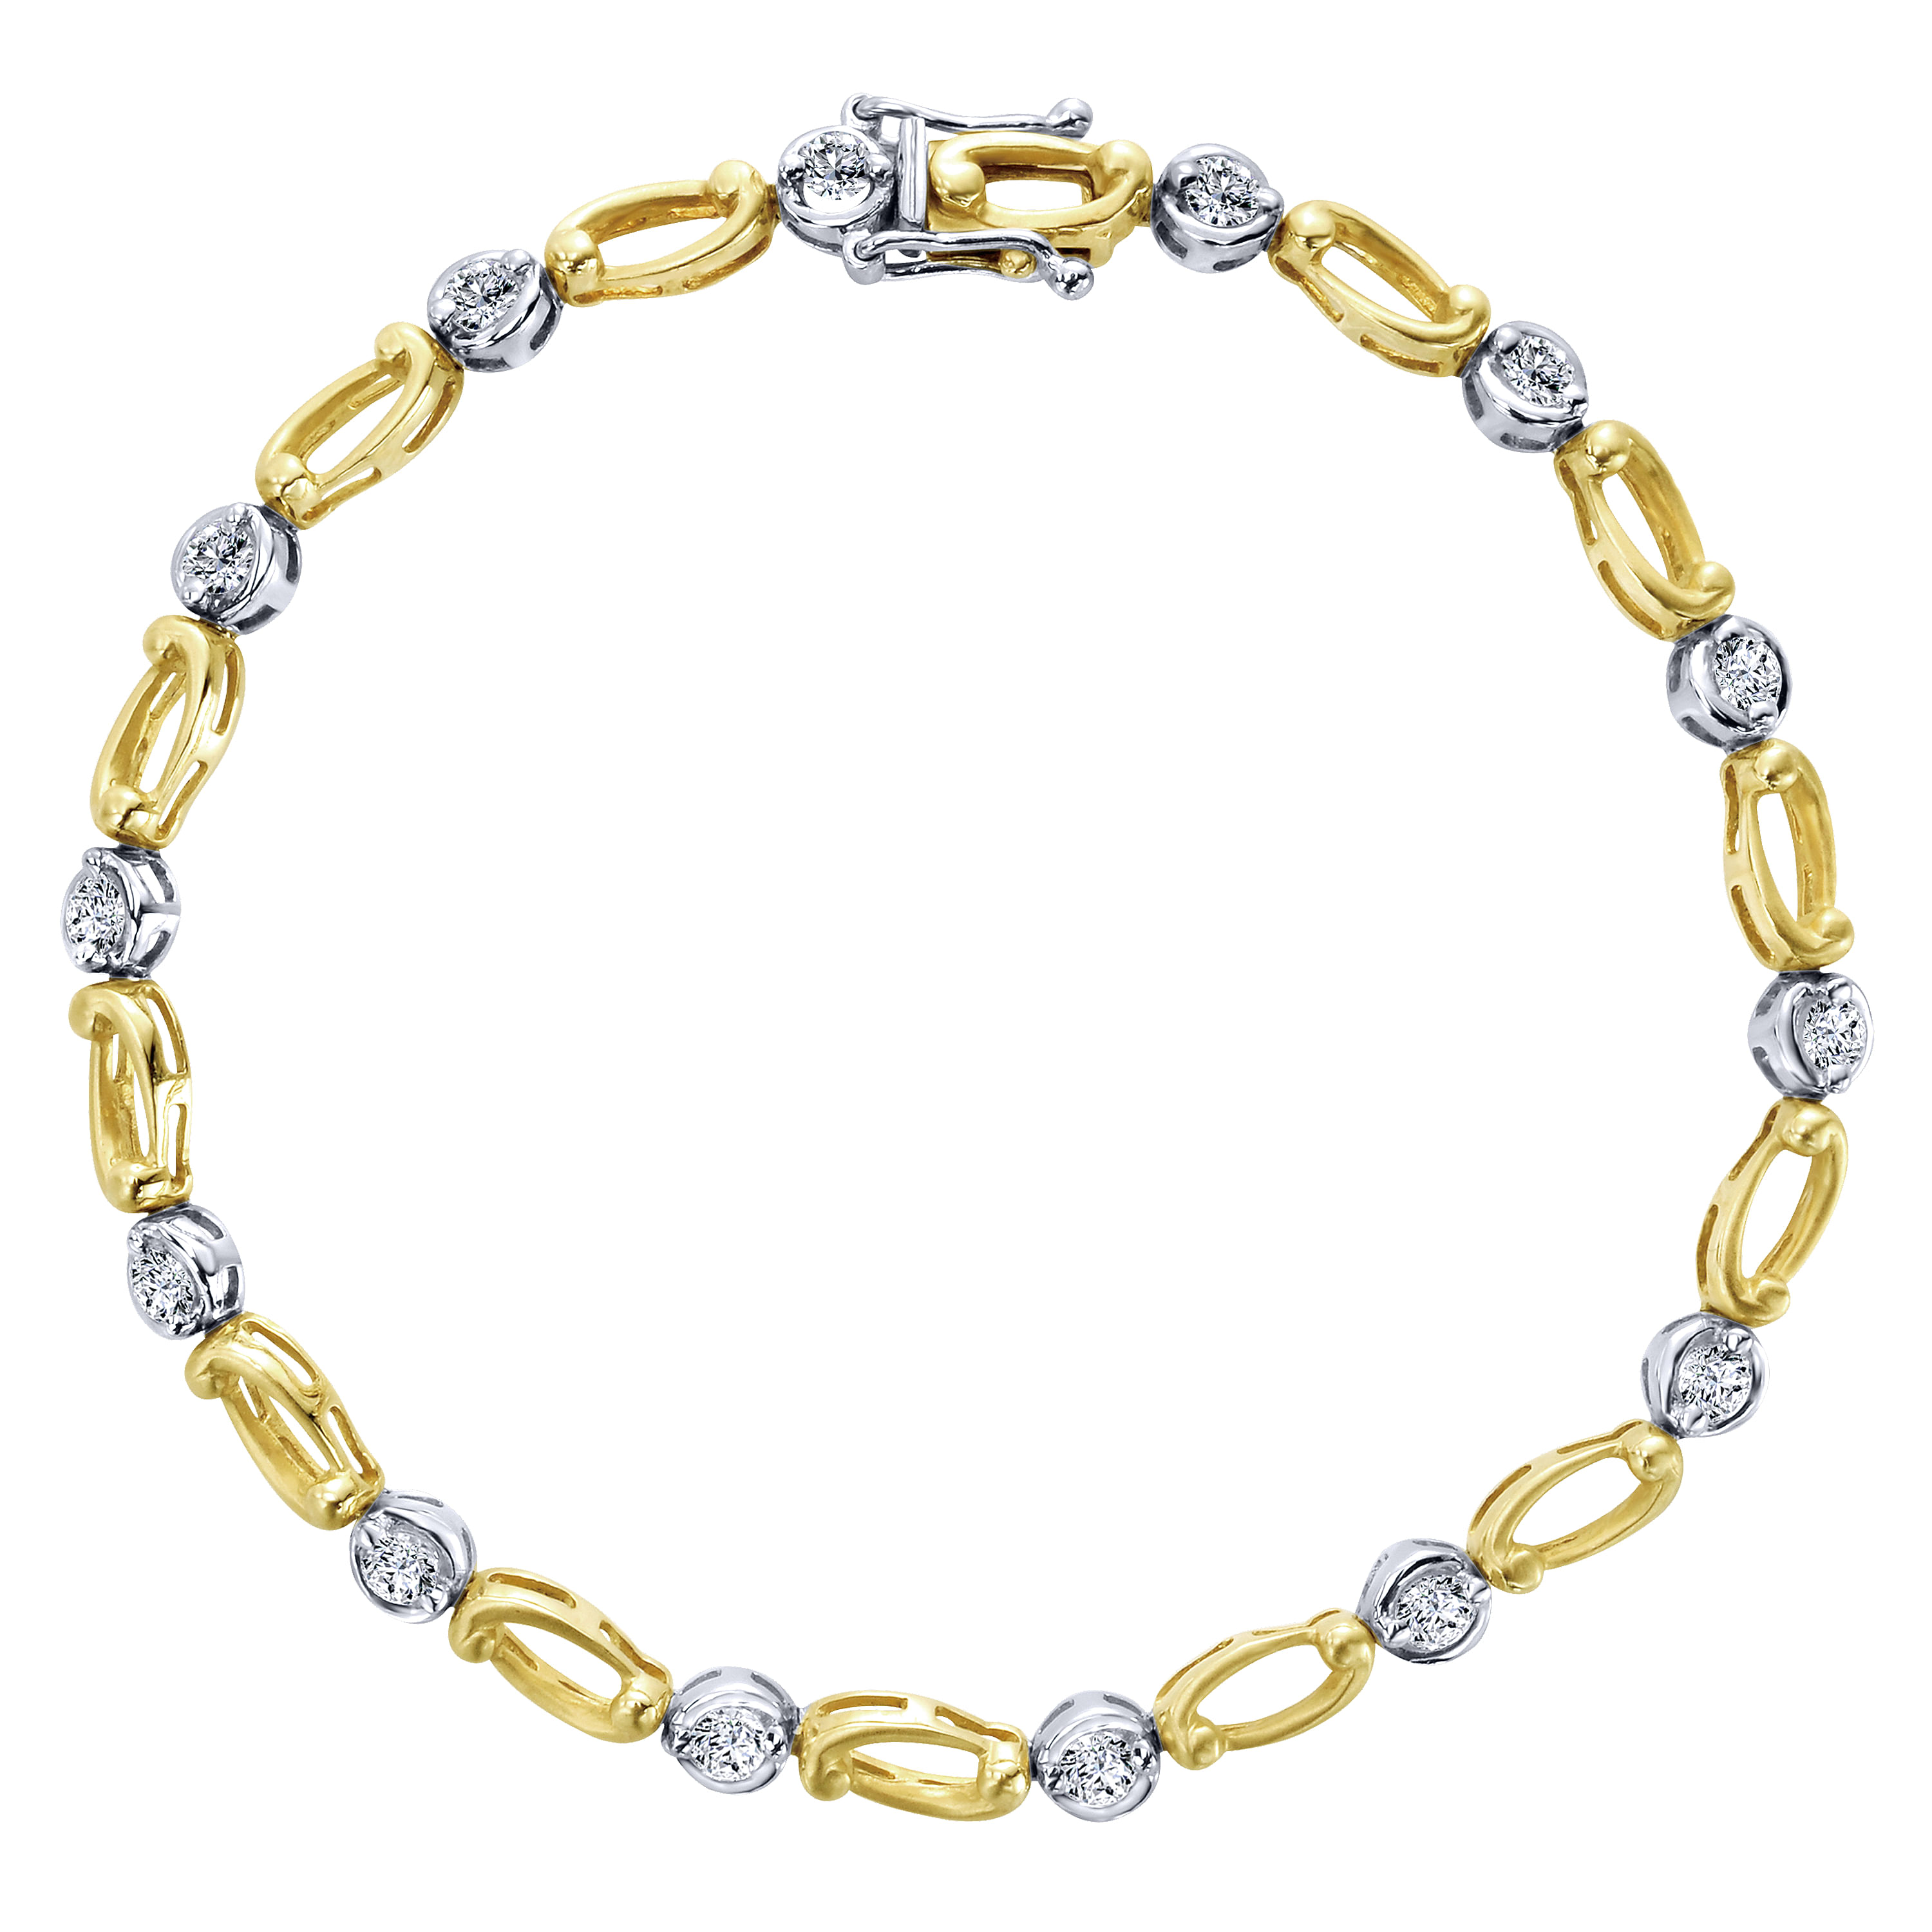 14K Yellow and White Gold Bracelet with Round Diamonds and Gold Ovals